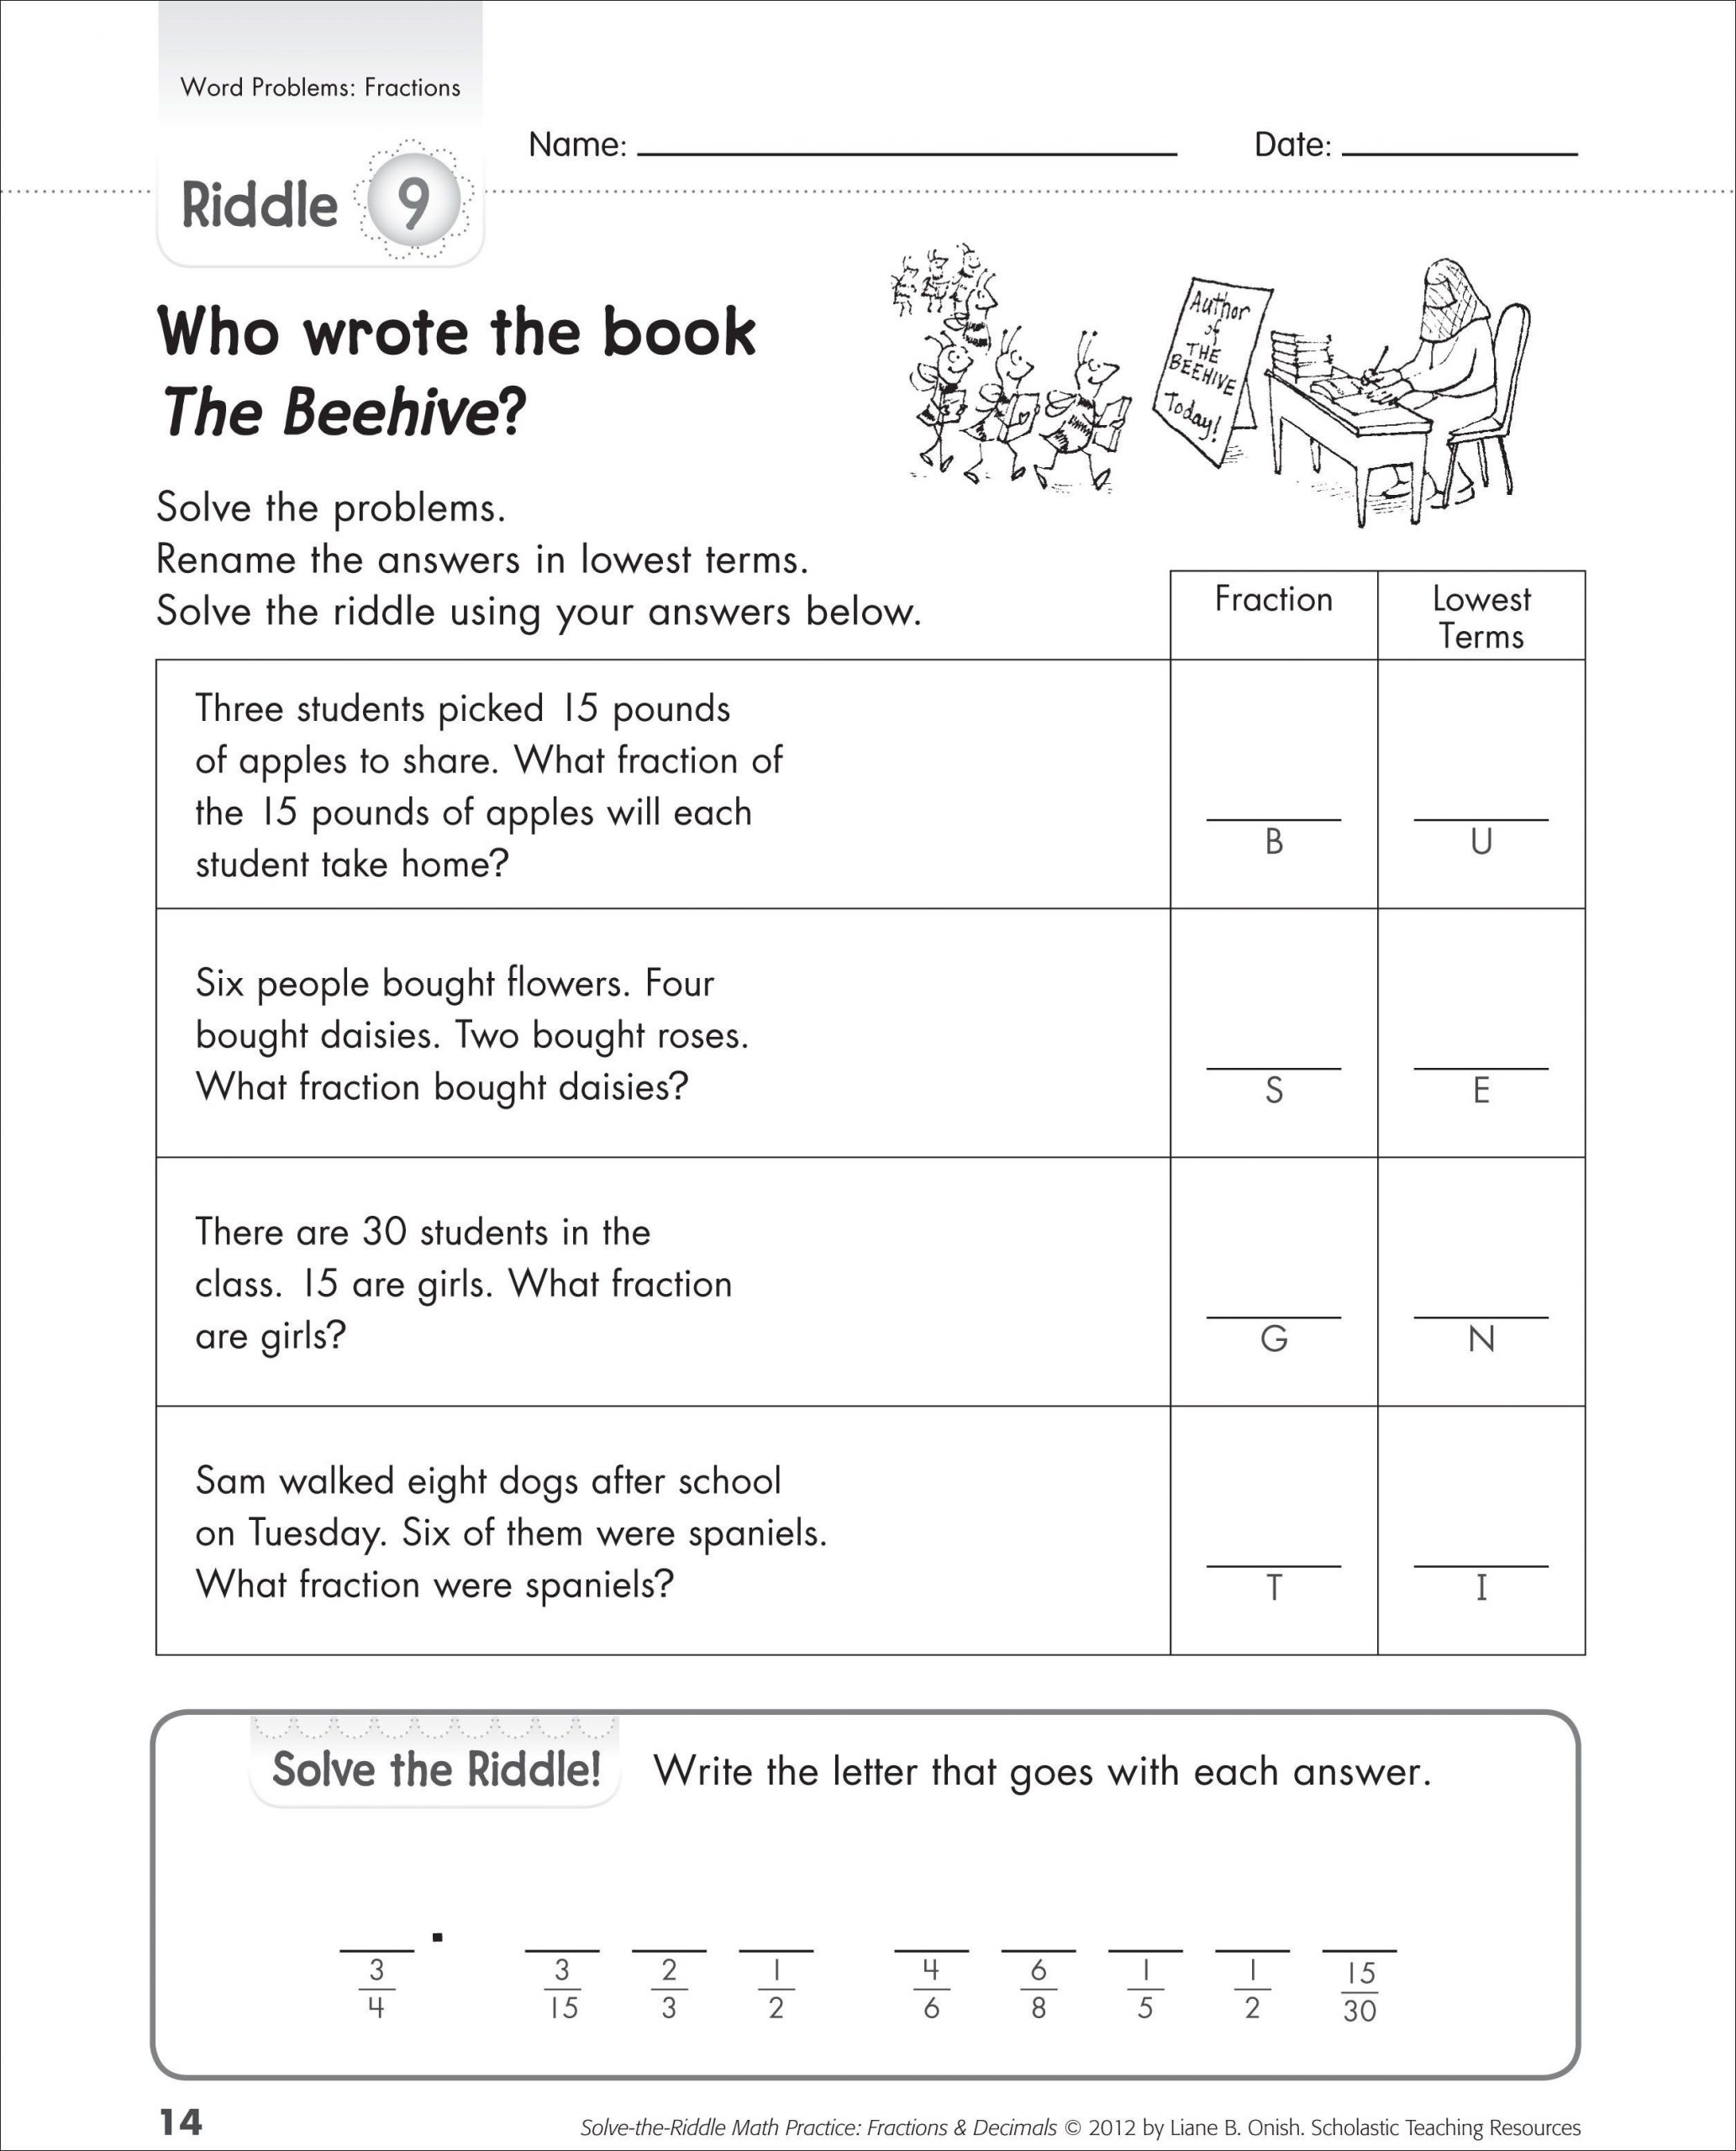 Dividing Fractions Word Problems Worksheet Help Your Kids Learn Fractions with these Word Problems